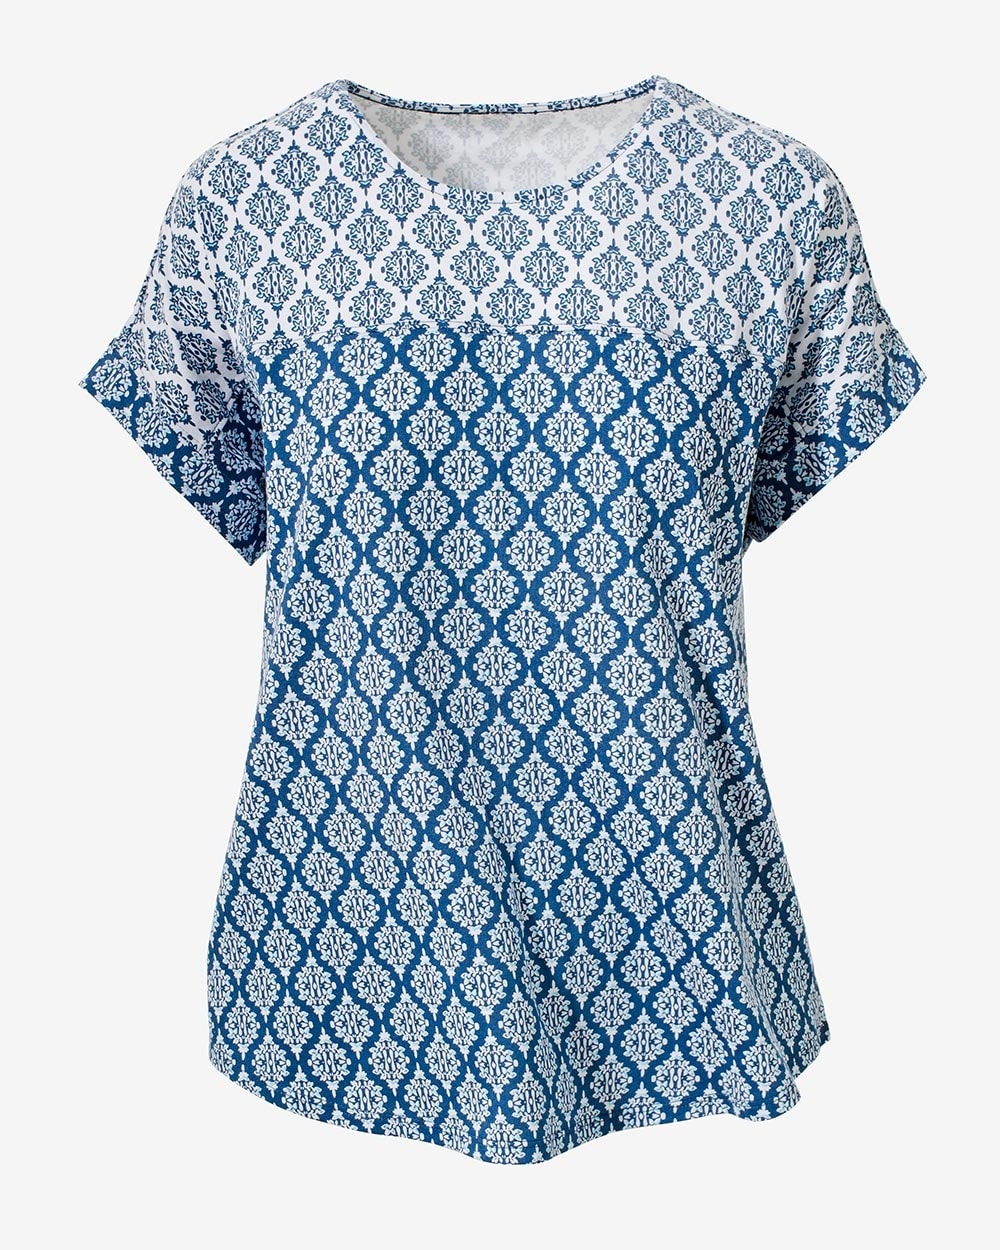 Chic Medallions Two-Print Block Tee